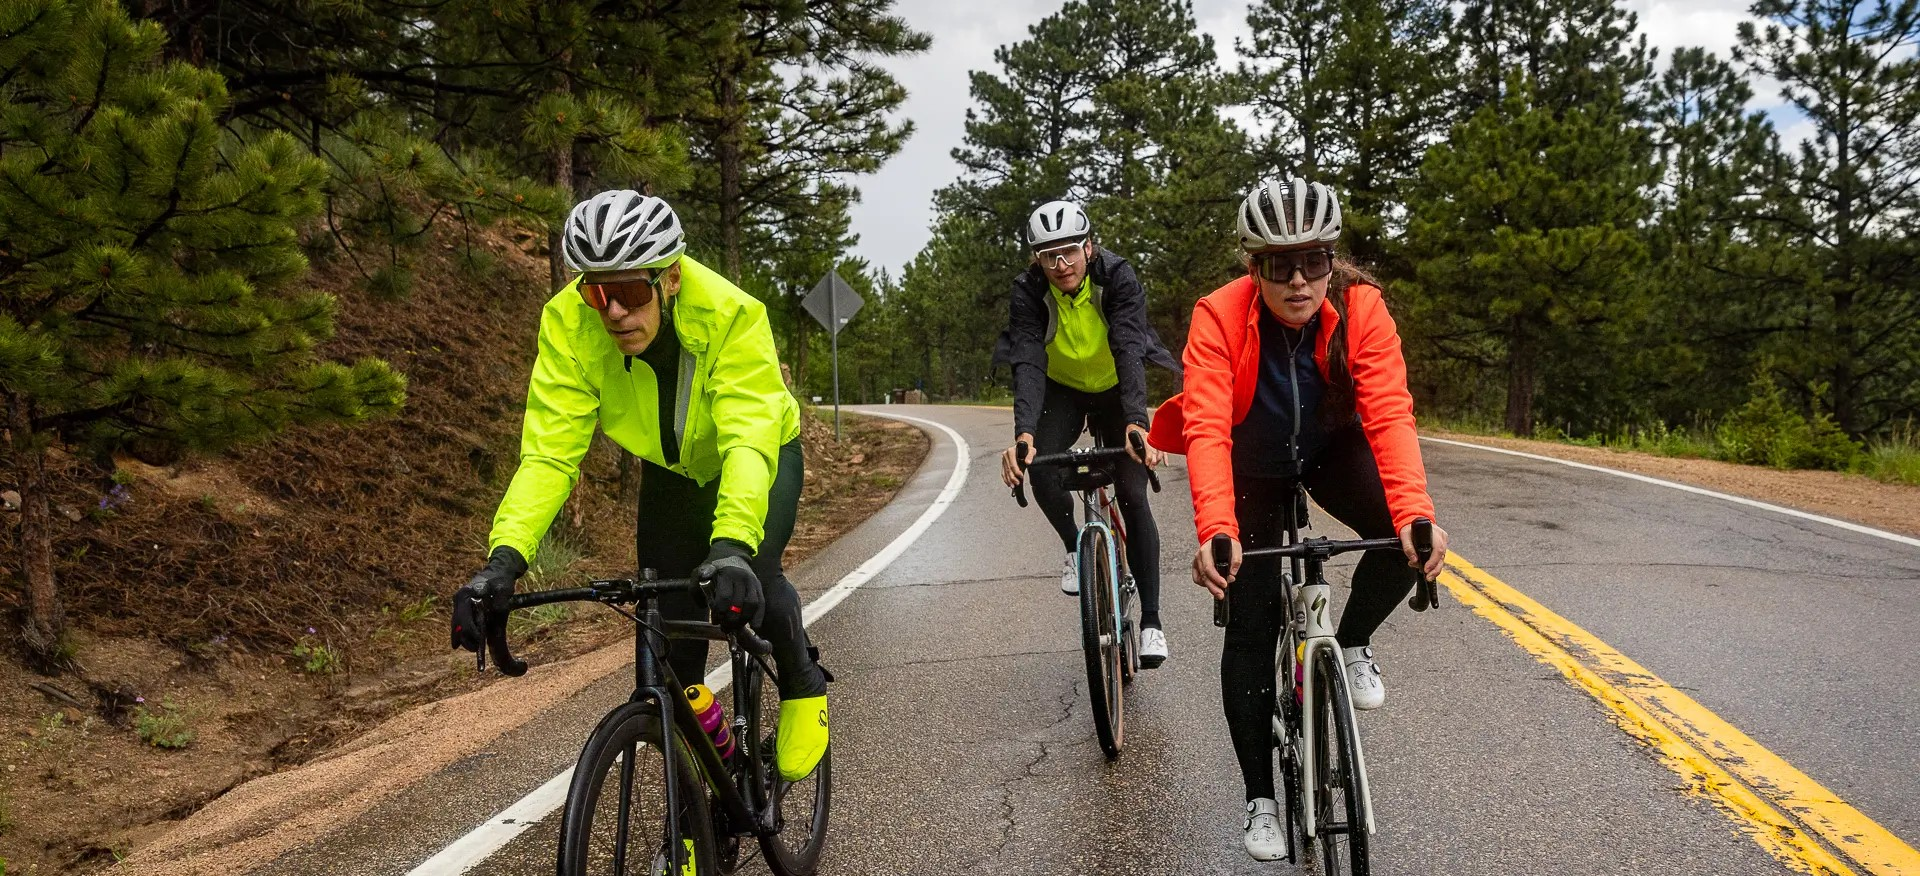 Group of road cyclist riding in the cool, wet weather wearing PEARL iZUMi outerwear